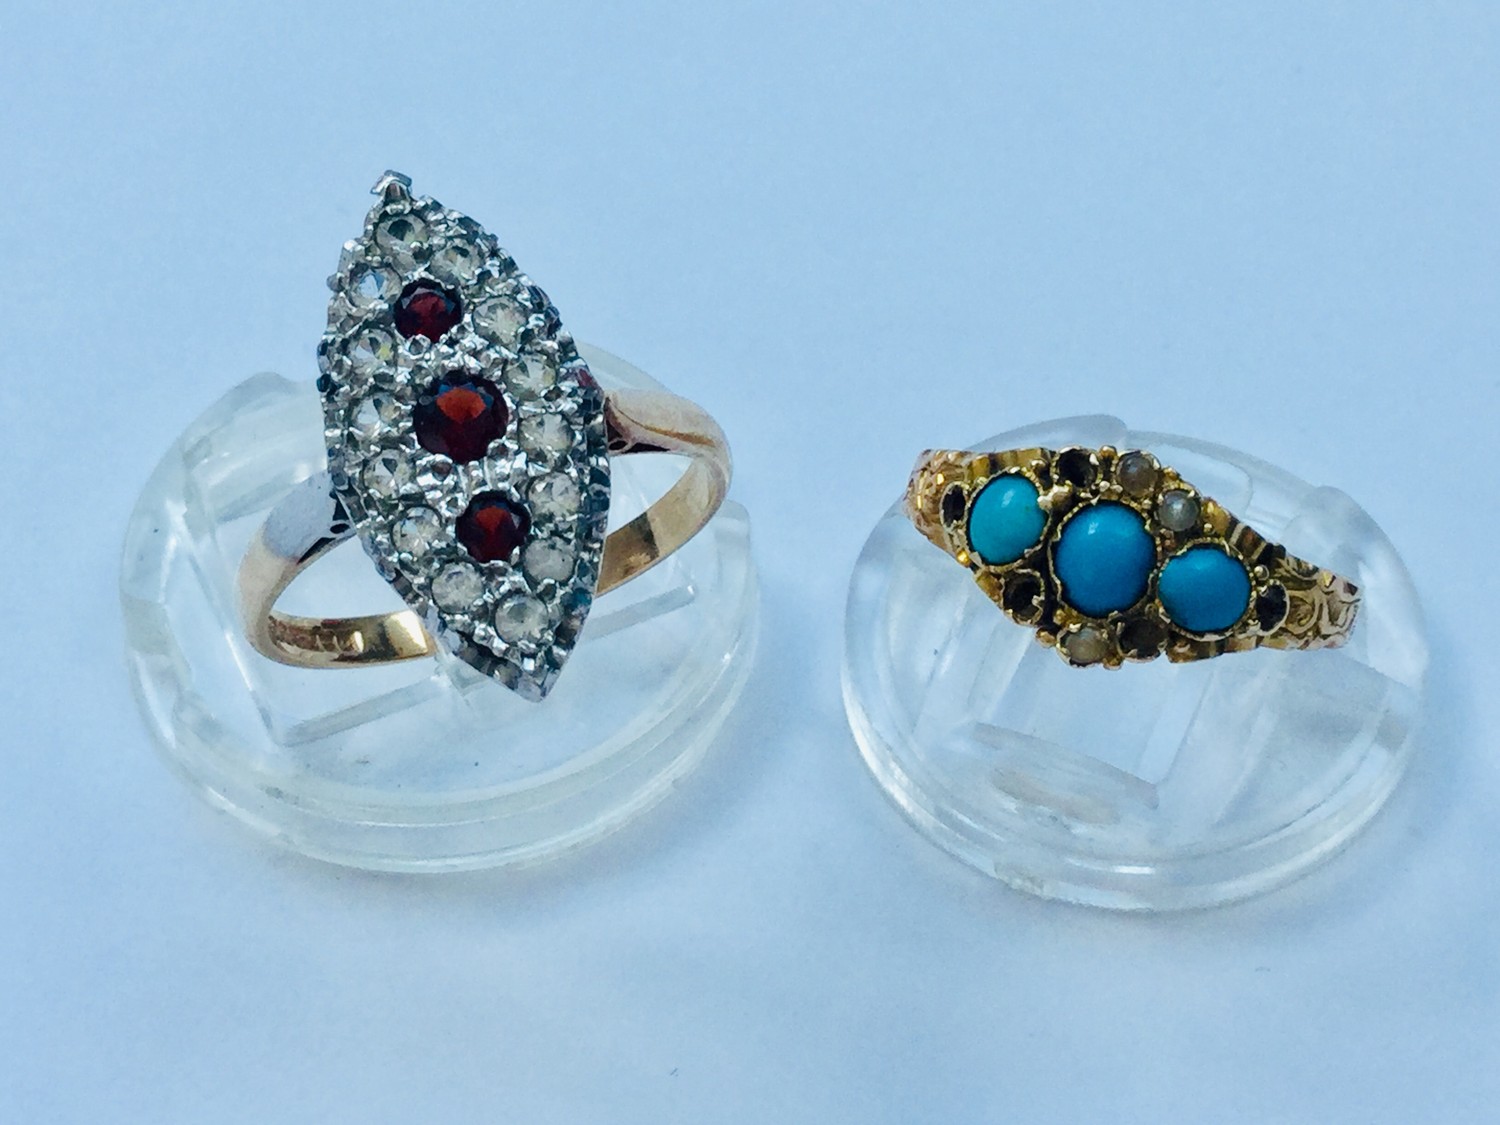 A 9ct gold Art Deco style dress ring set with 3 x round faceted red stones, surrounded by small